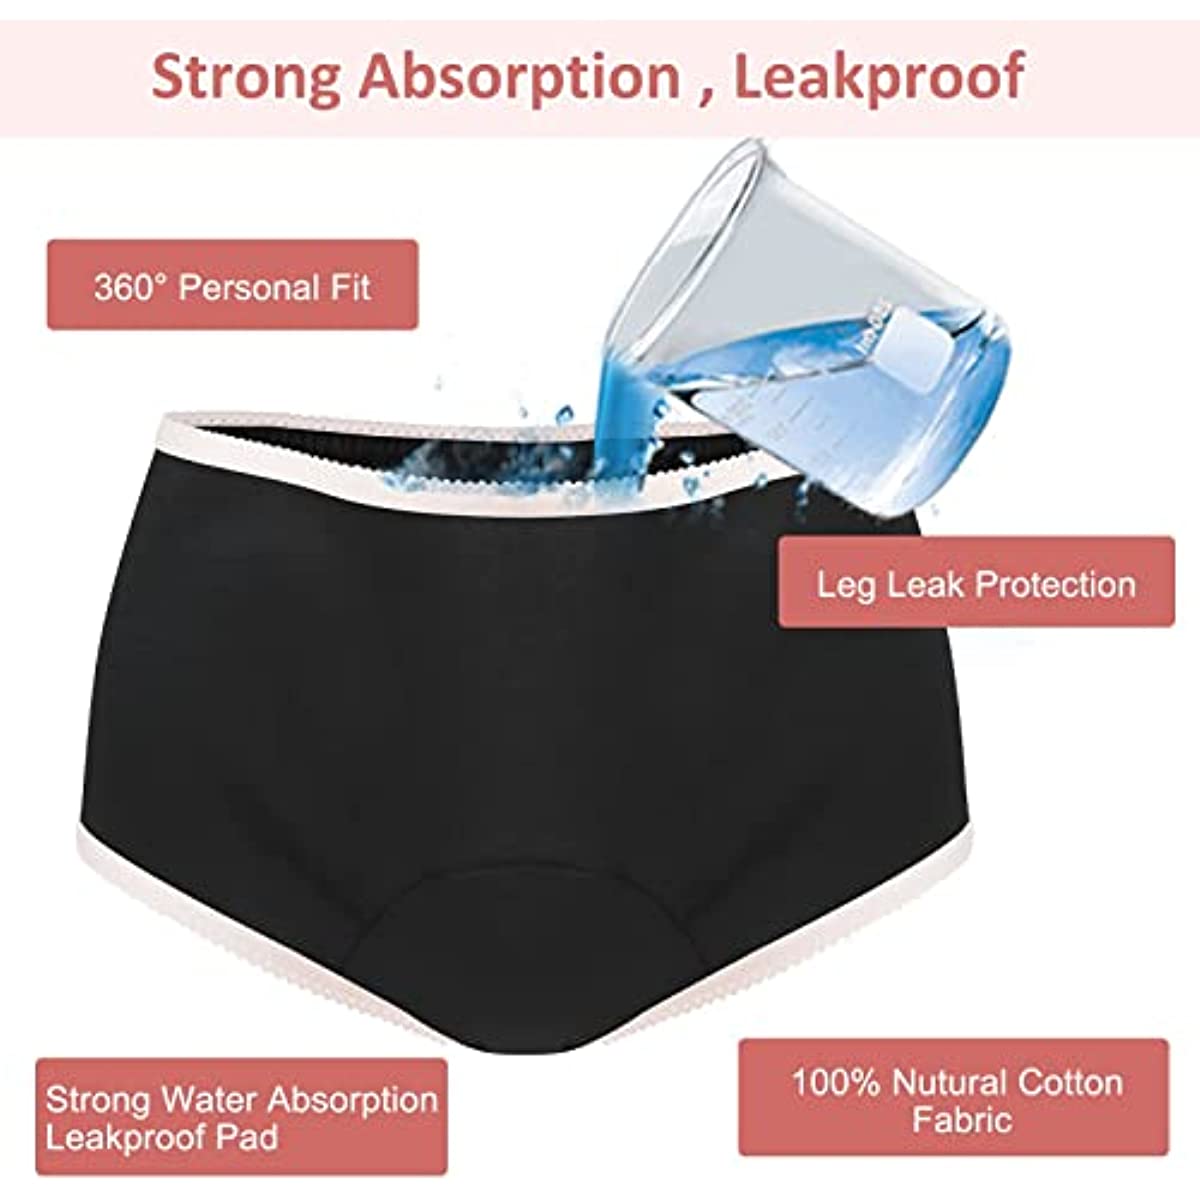 Incontinence Underwear for Women Washable Super Absorbency Urinary  Incontinence Briefs 6pcs